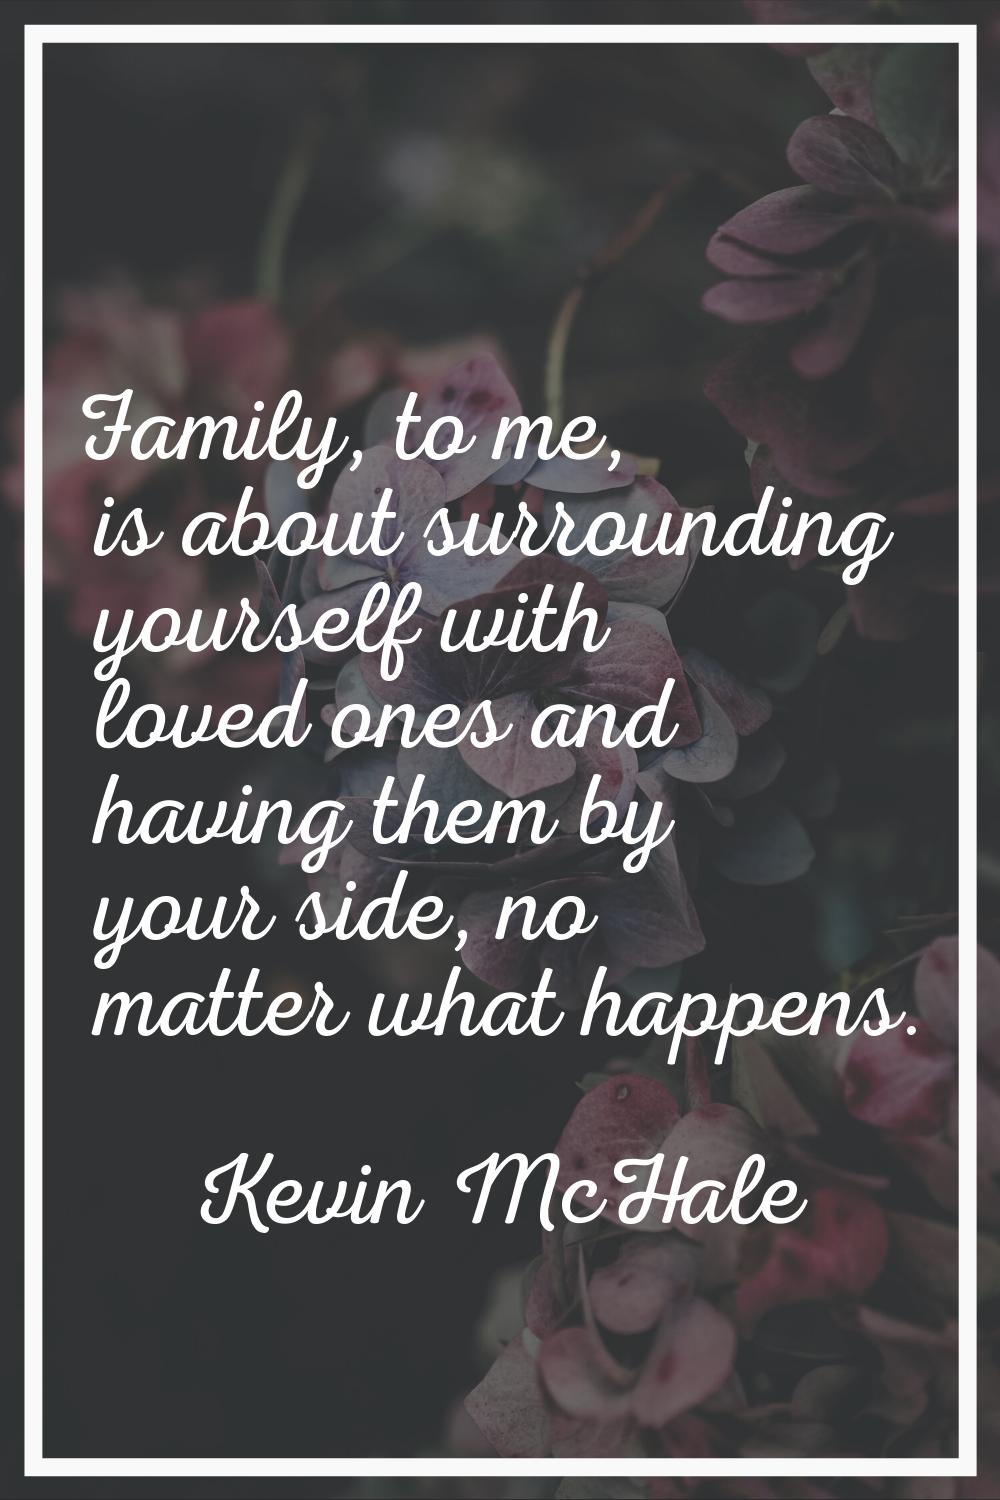 Family, to me, is about surrounding yourself with loved ones and having them by your side, no matte